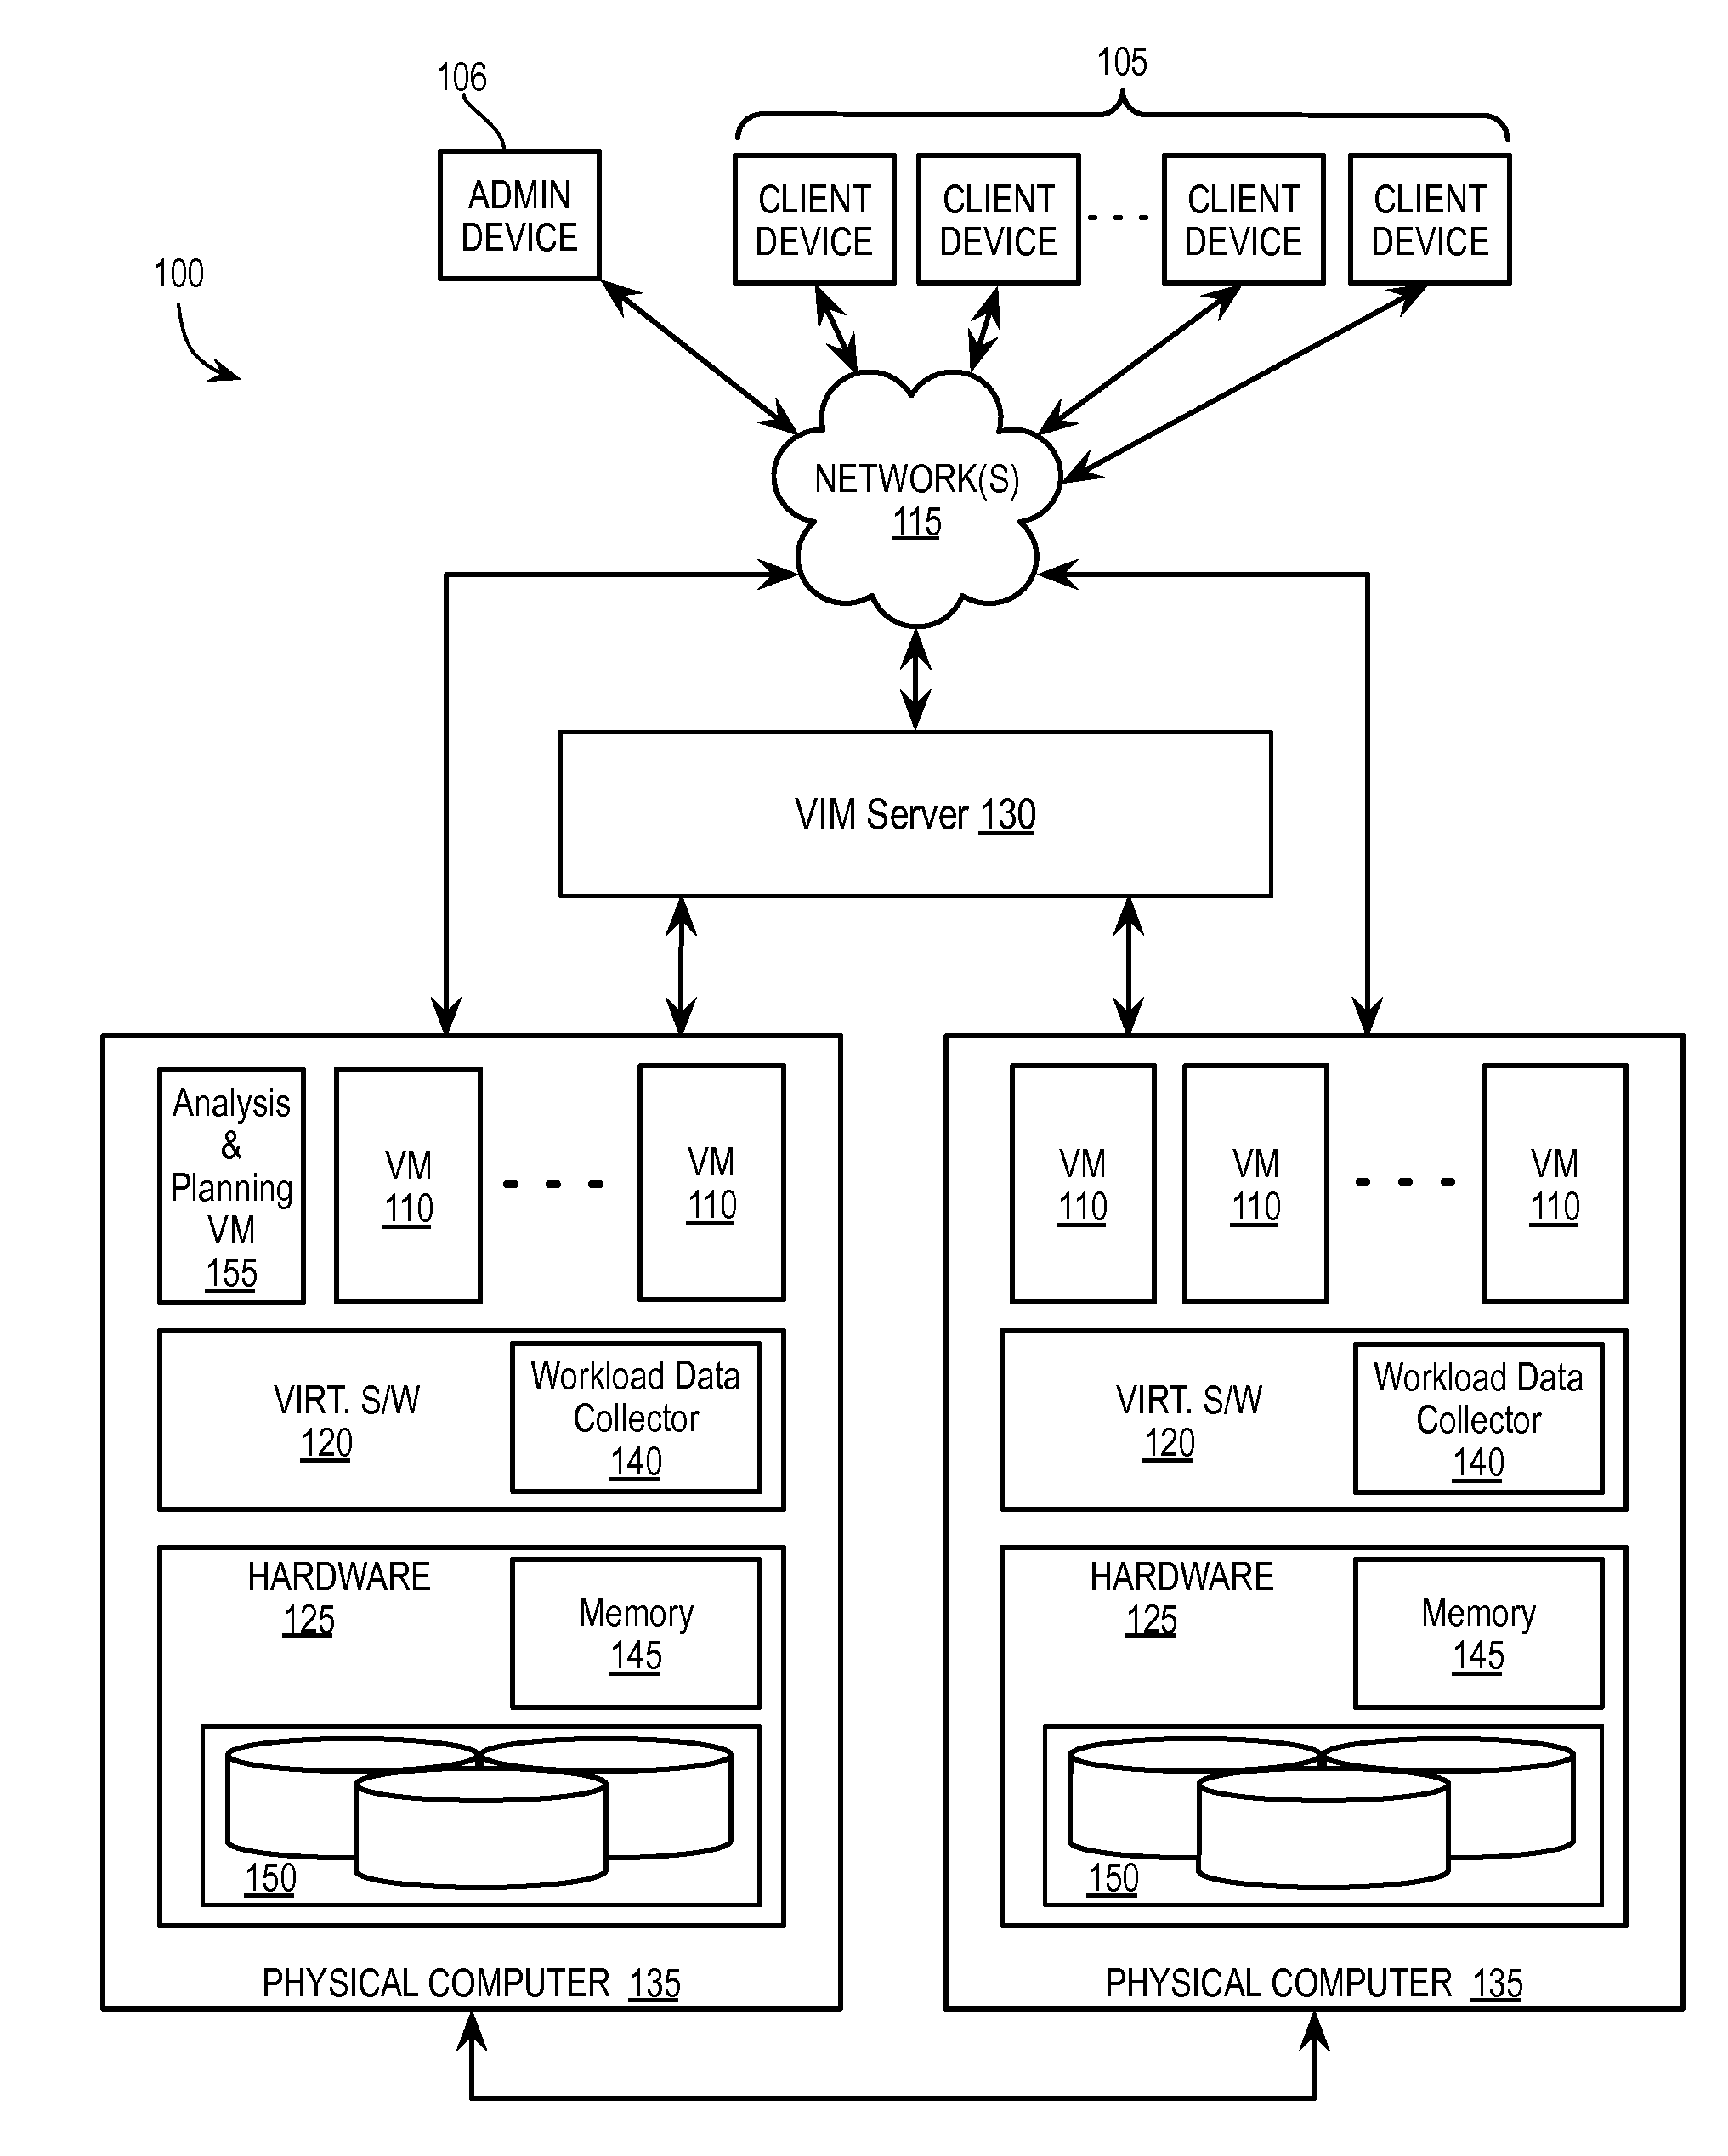 Workload selection and cache capacity planning for a virtual storage area network